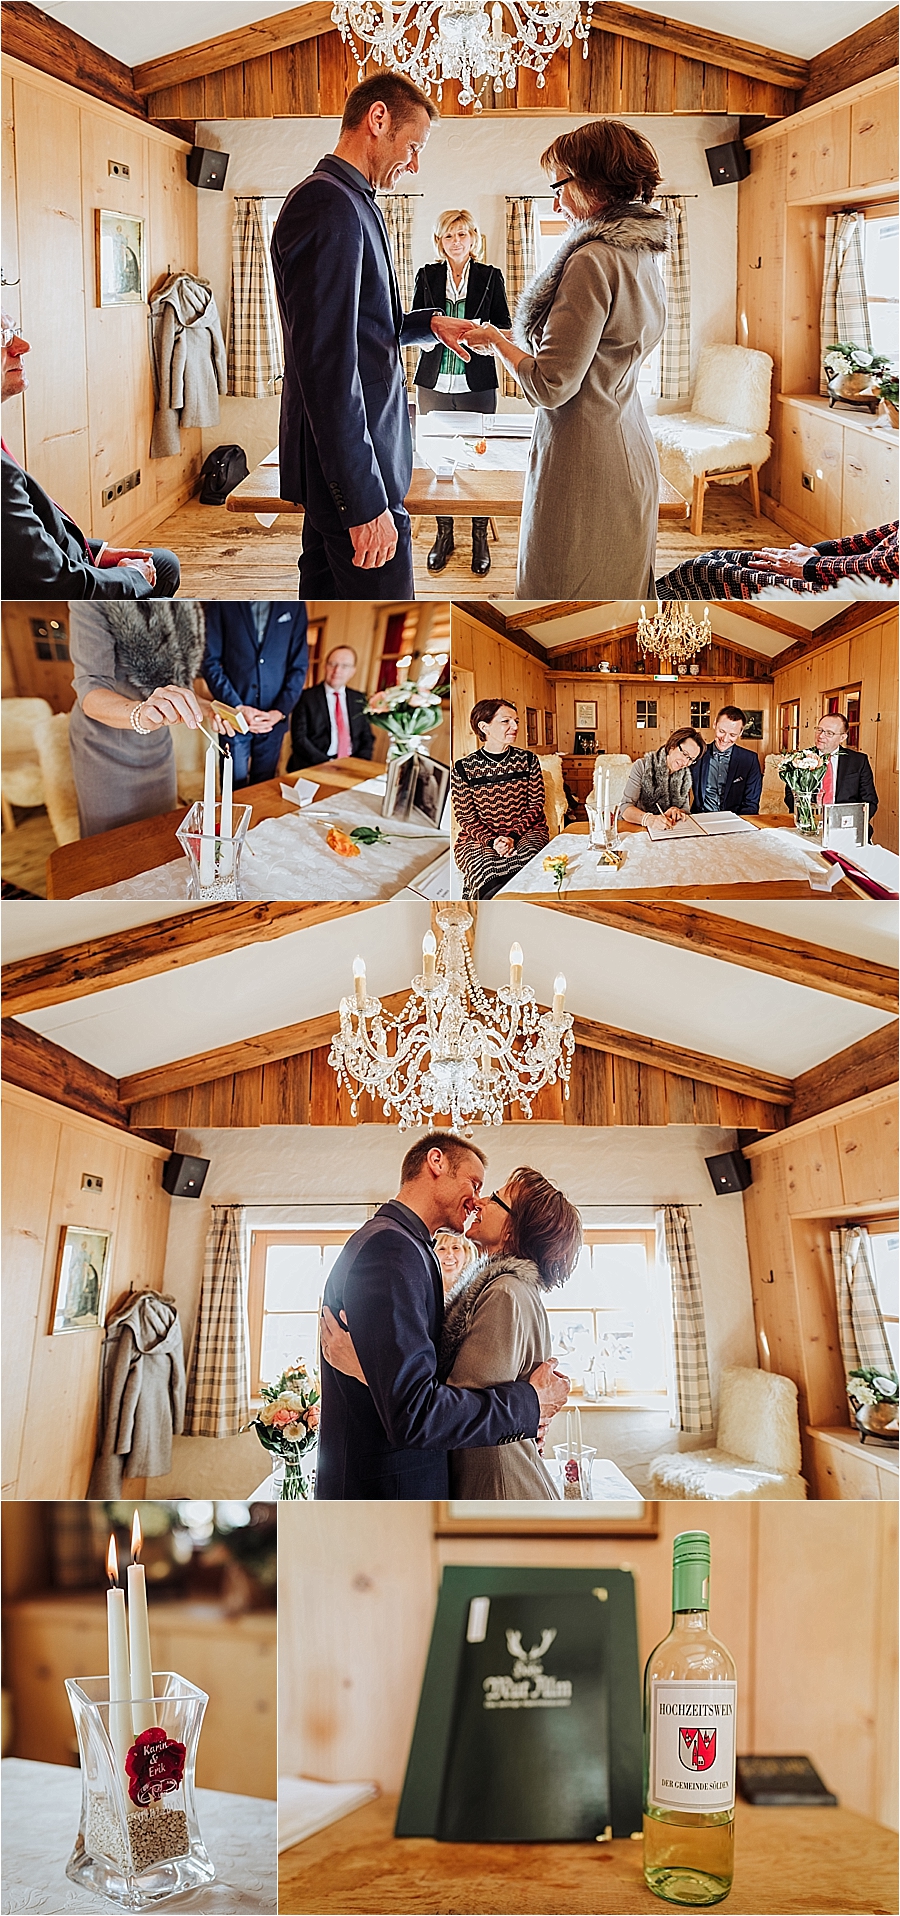 Thr bride & groom exchange rings during their mountain wedding in Austria in the Hohe Mut Alm by Wild Connections Photography